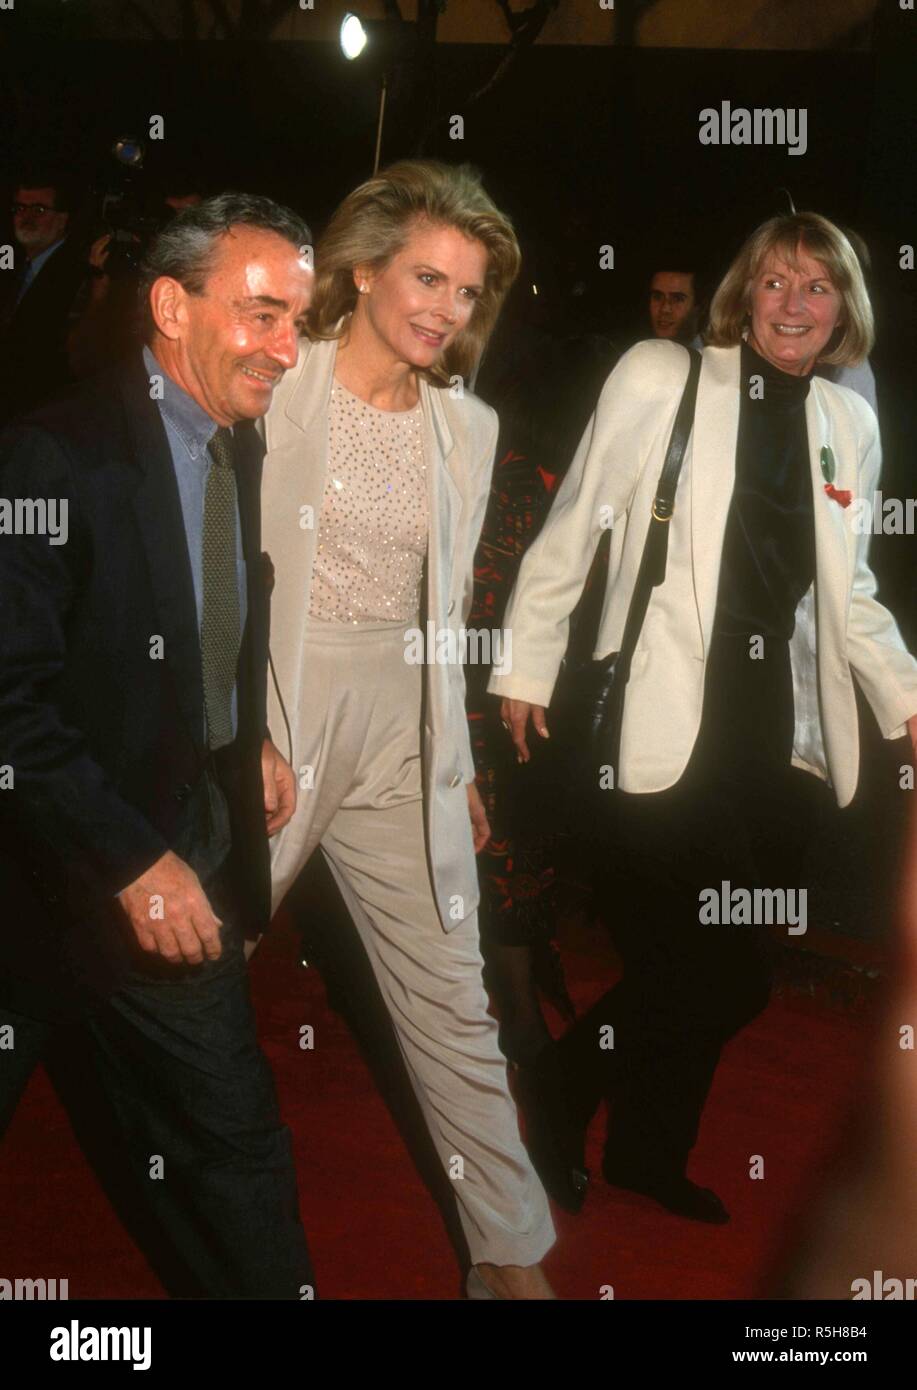 UNIVERSAL CITY, CA - MARCH 9: Director Louis Malle, wife actress Candice Bergen and publicist Pat Kingsley attend the 19th Annual People's Choice Awards on March 9, 1993 at Unversal Studios in Universal City, California. Photo by Barry King/Alamy Stock Photo Stock Photo